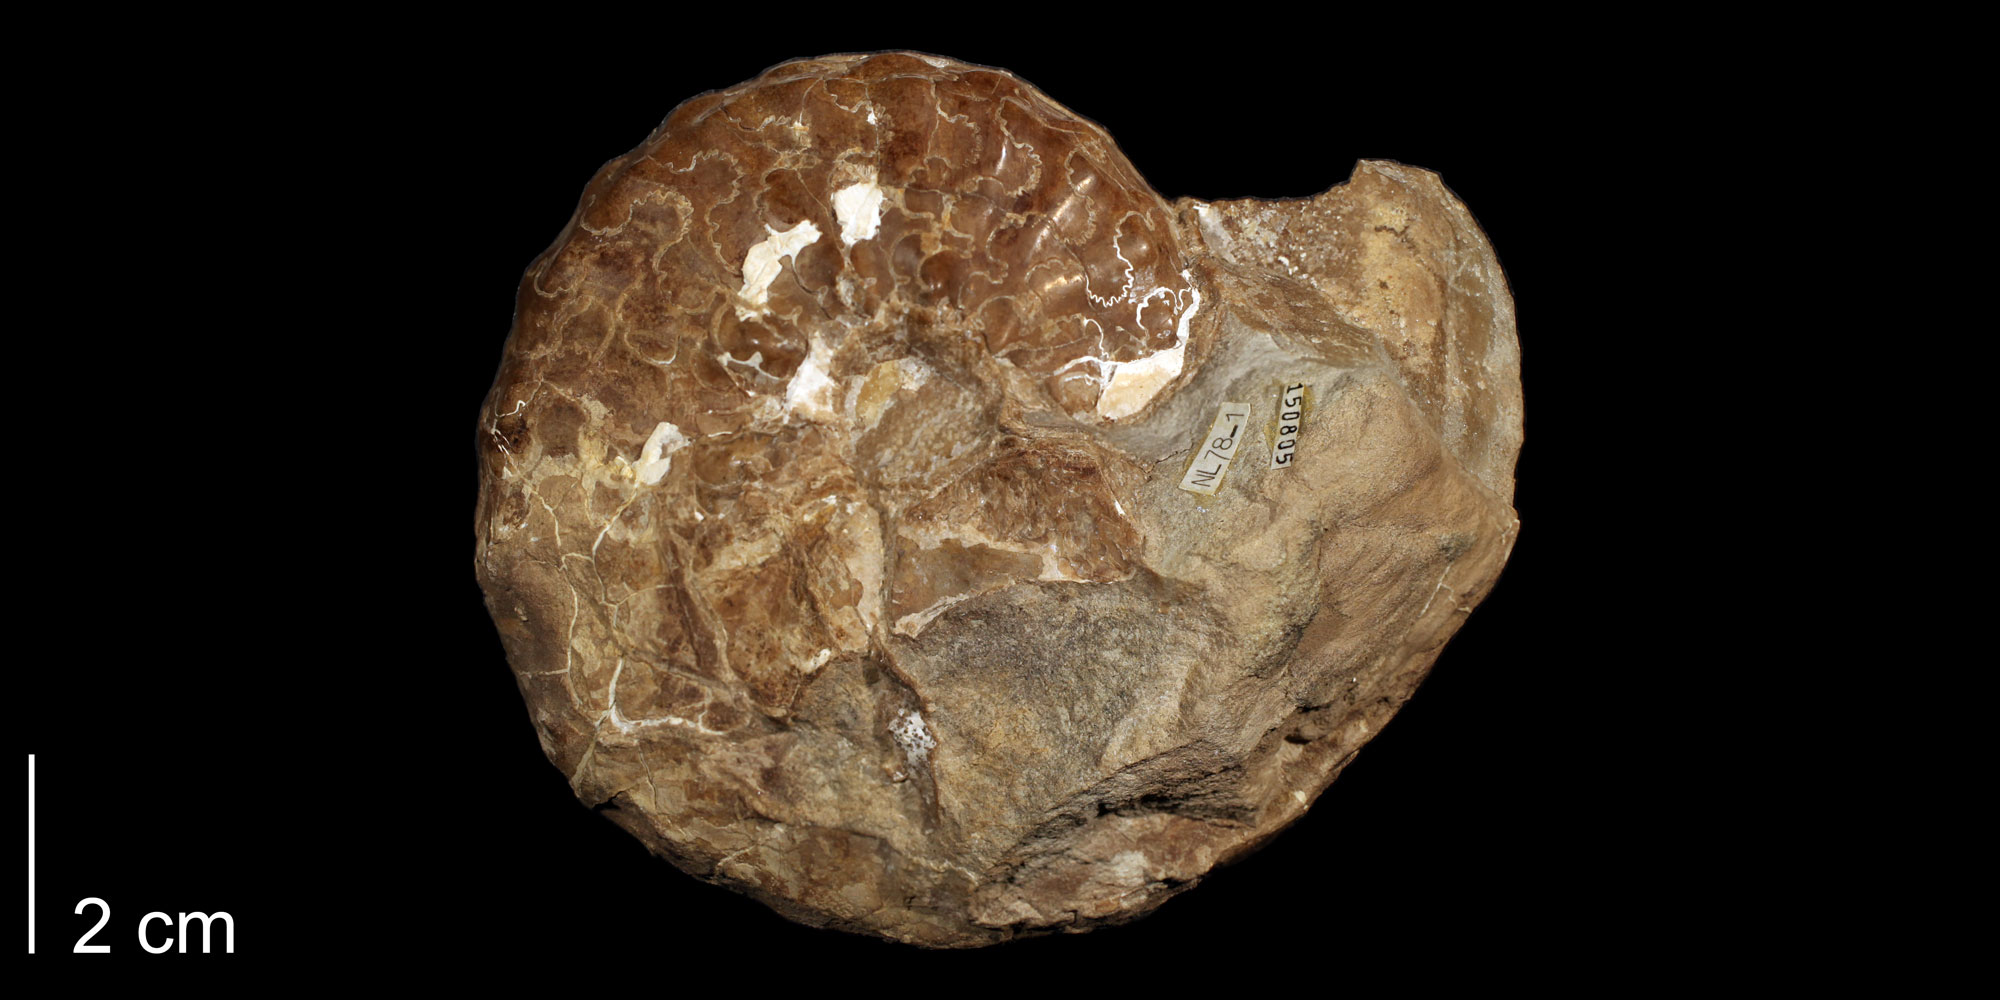 Photograph of the shell of an ammonite from the Cretaceous of New Mexico shown in side view. The shell is medium brown in color and spiraling in one plane. The sinuous ammonitic sutures can be seen.